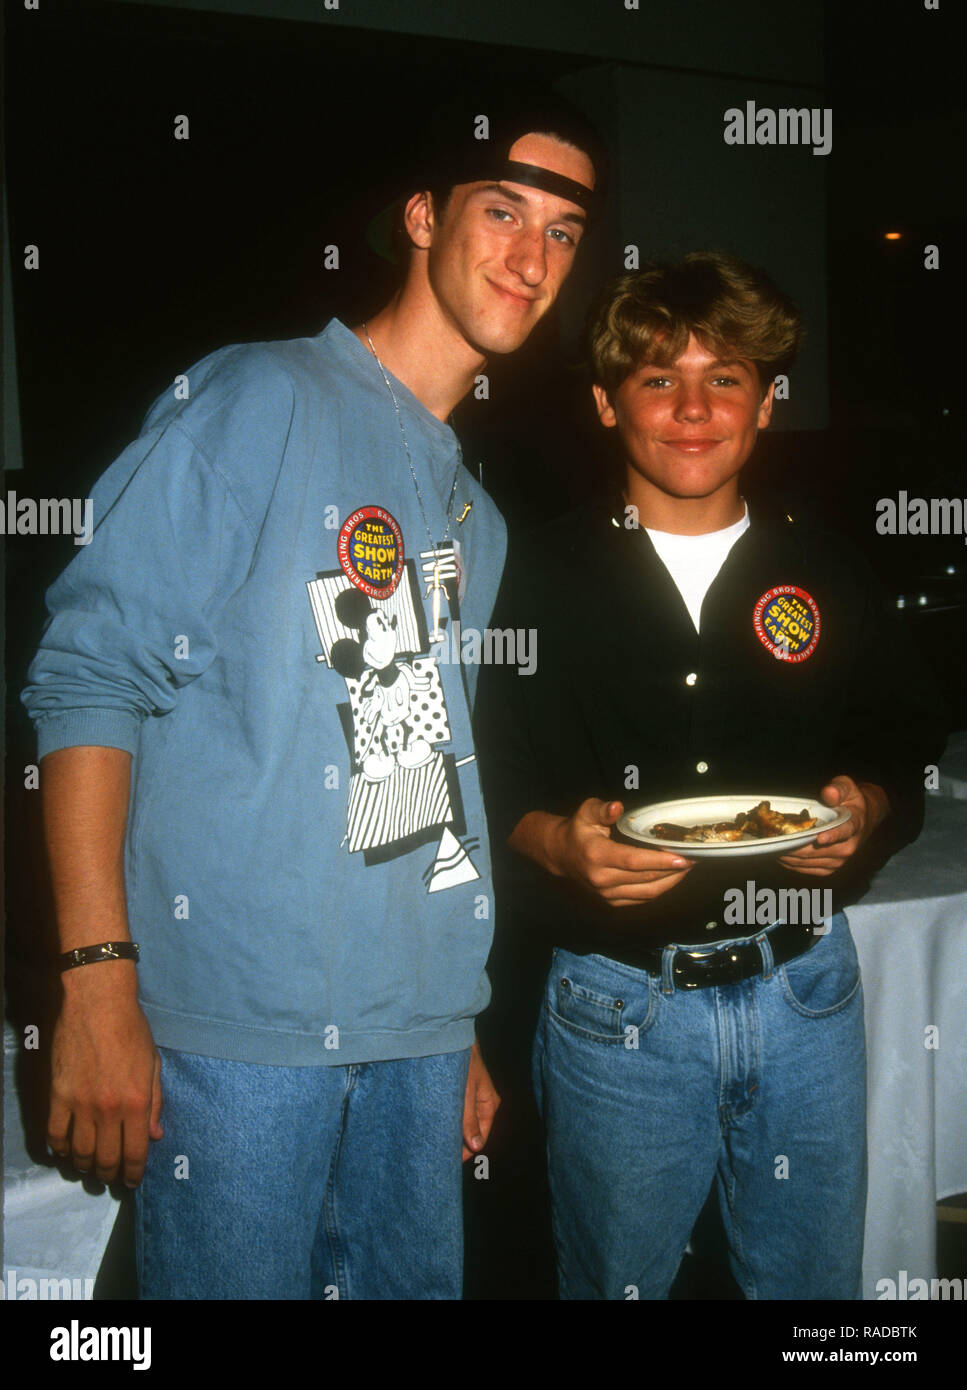 LOS ANGELES, CA - JULY 22: (L-R) Actor Dustin Diamond and actor Jason James Richter attend Ringling Brothers Barnum and Bailey Circus on July 22, 1993 at the Los Angeles Sports Arena in Los Angeles, California. Photo by Barry King/Alamy Stock Photo Stock Photo